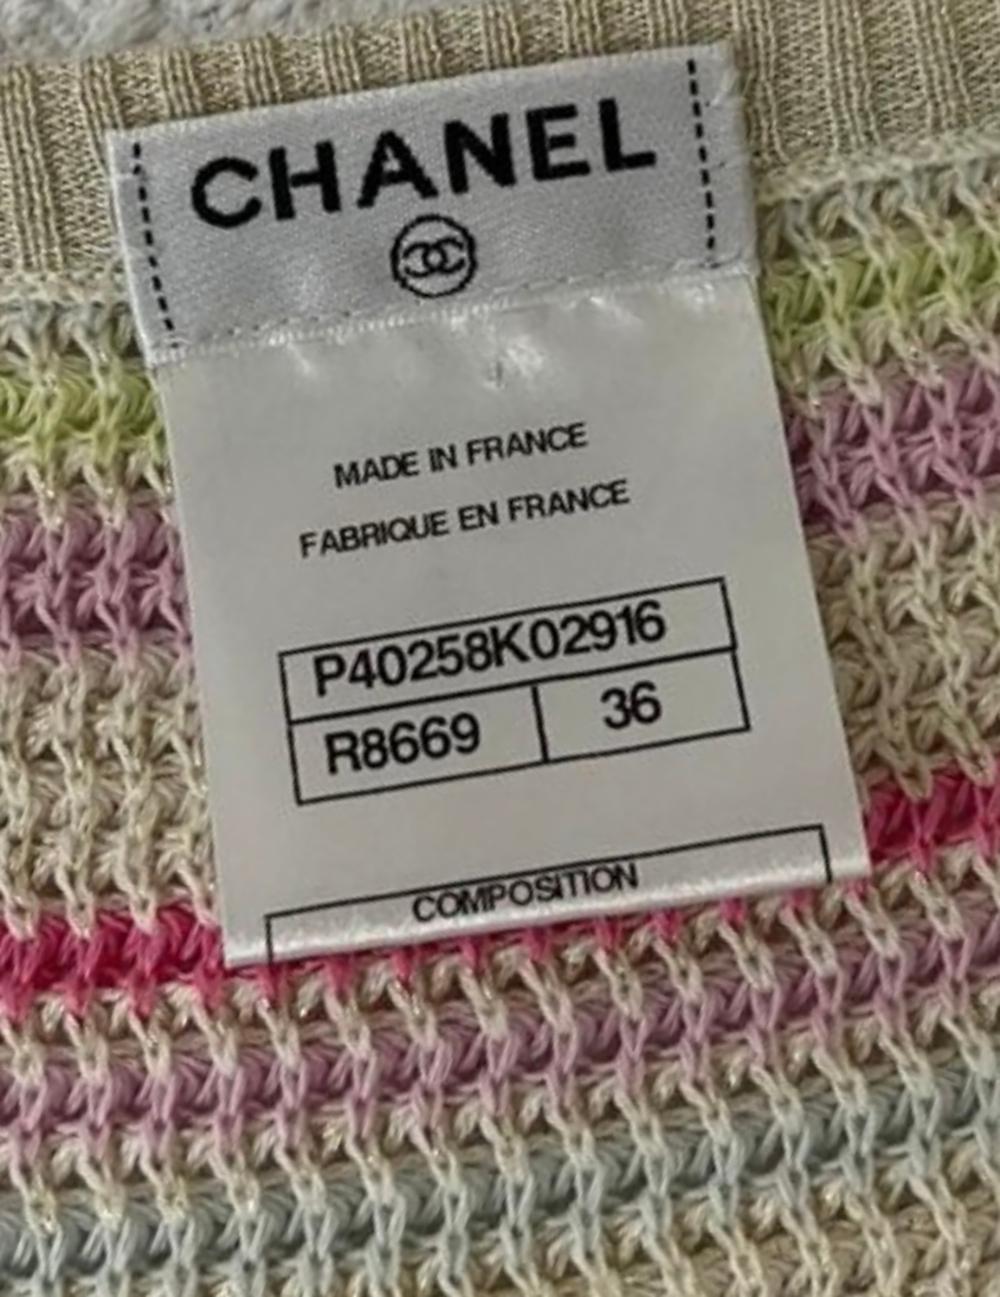 Chanel Saint Tropez Cruise Collection Runway Tunic Dress For Sale 10